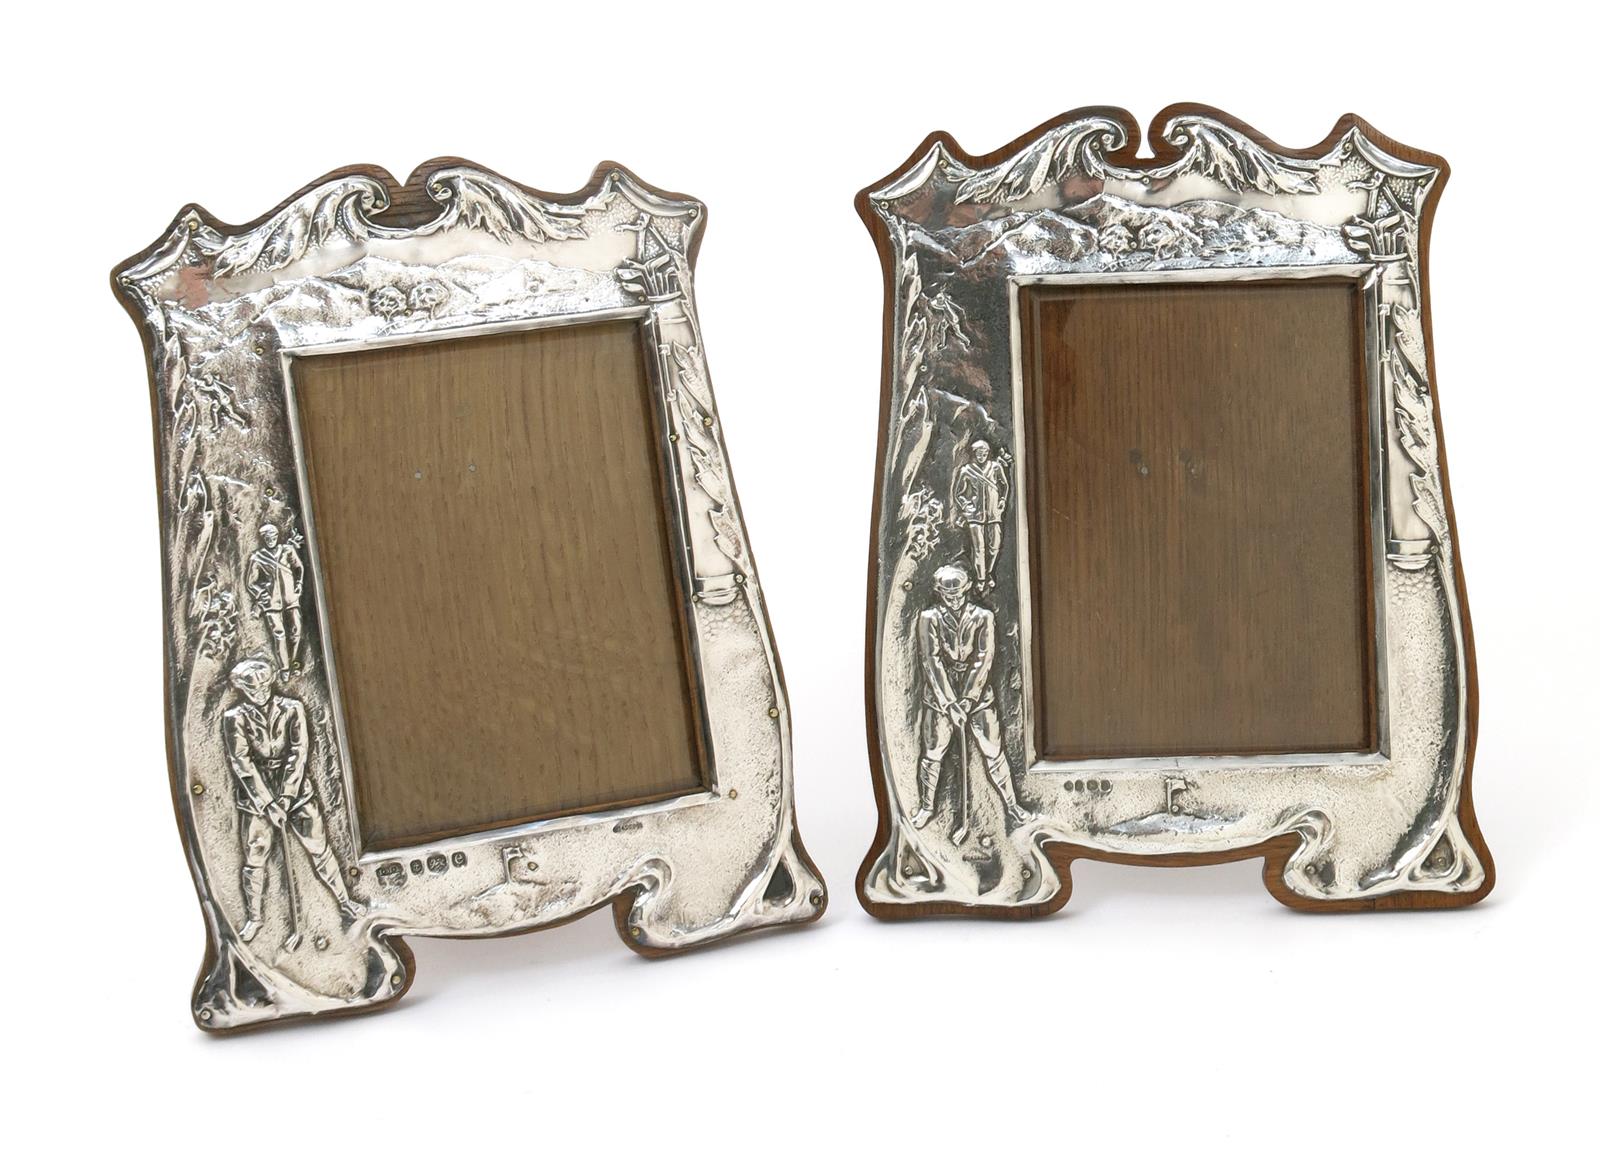 A pair of John Millward Banks silver photograph frames, each stamped in low relief with an Edwardian